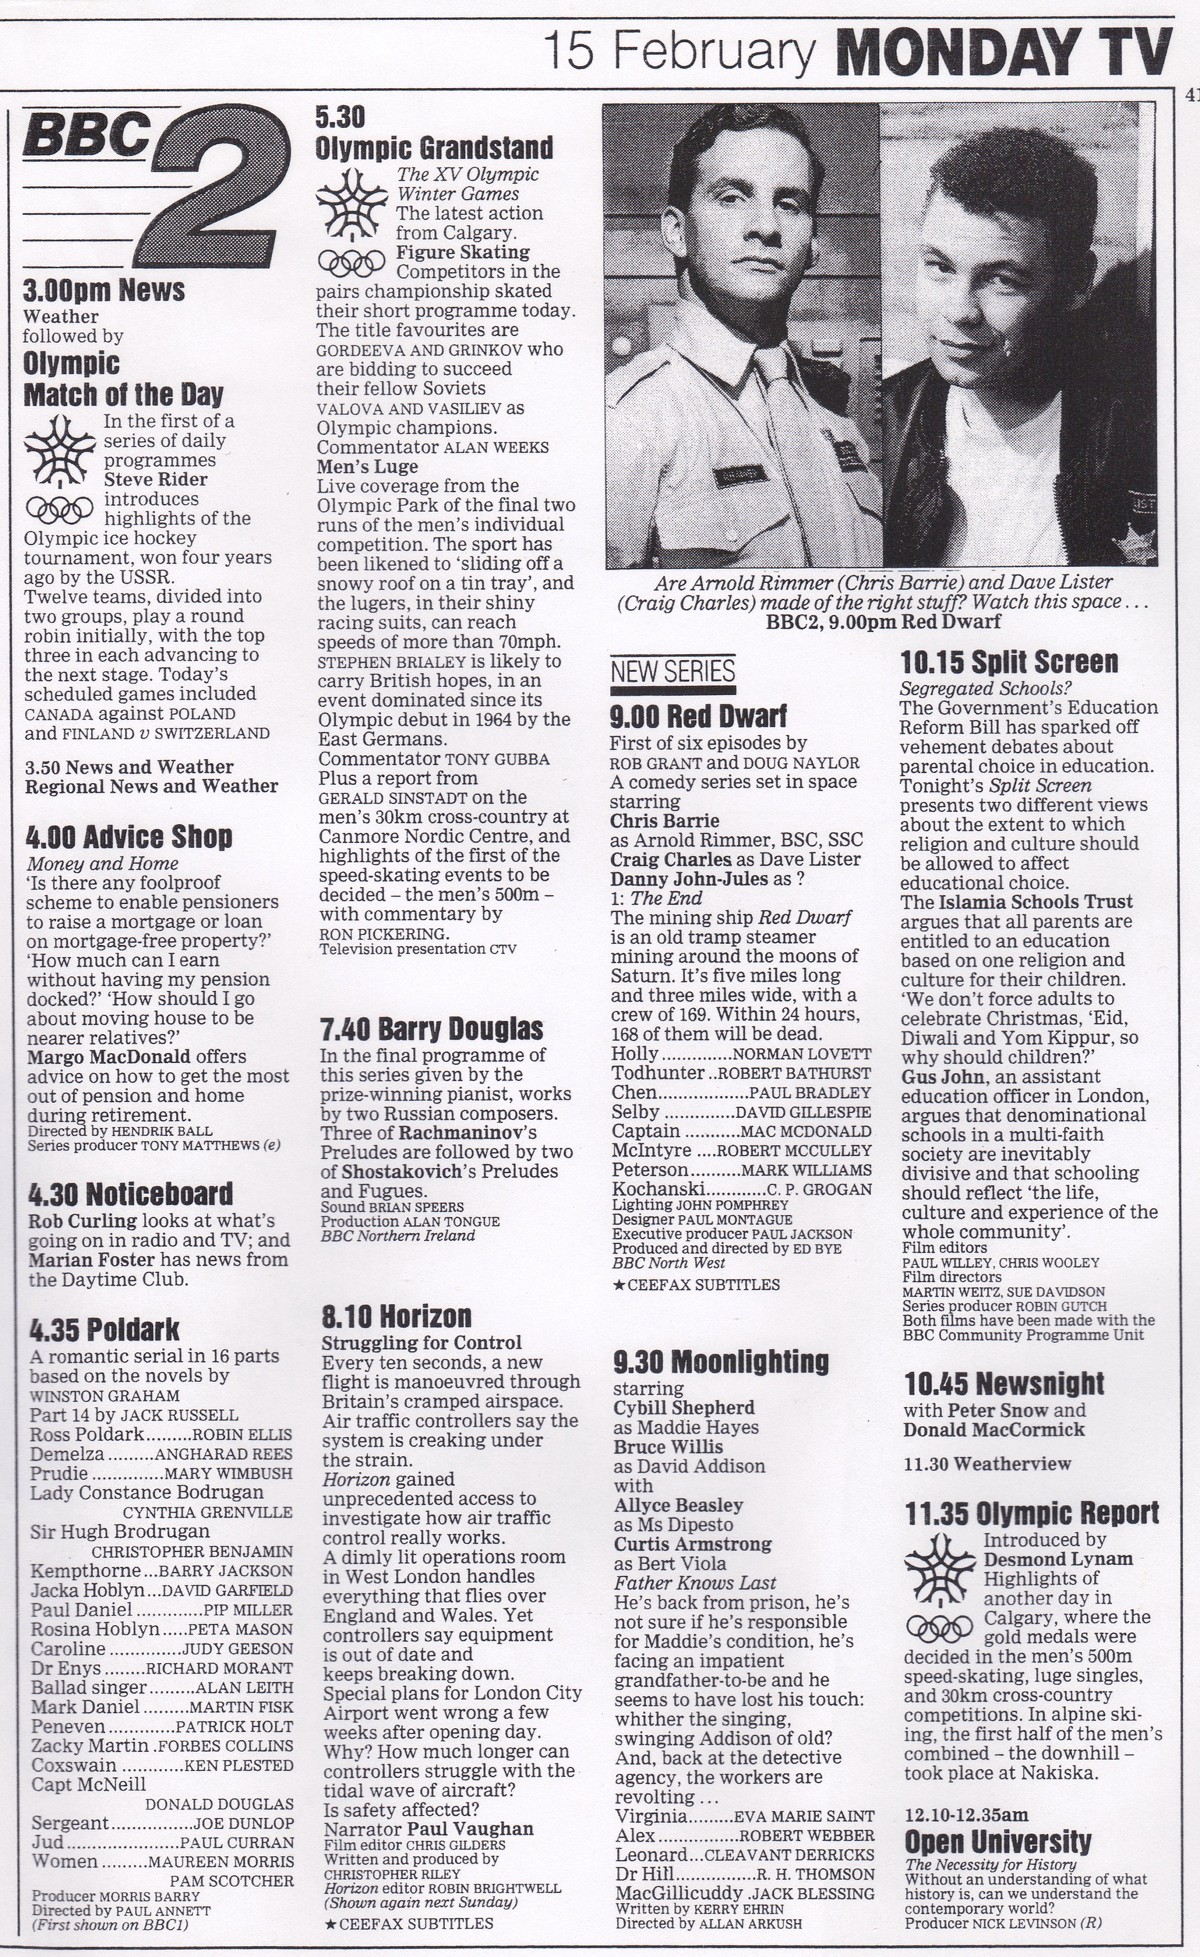 Full Radio Times page for the 15th February 1988, featuring the first episode of Red Dwarf